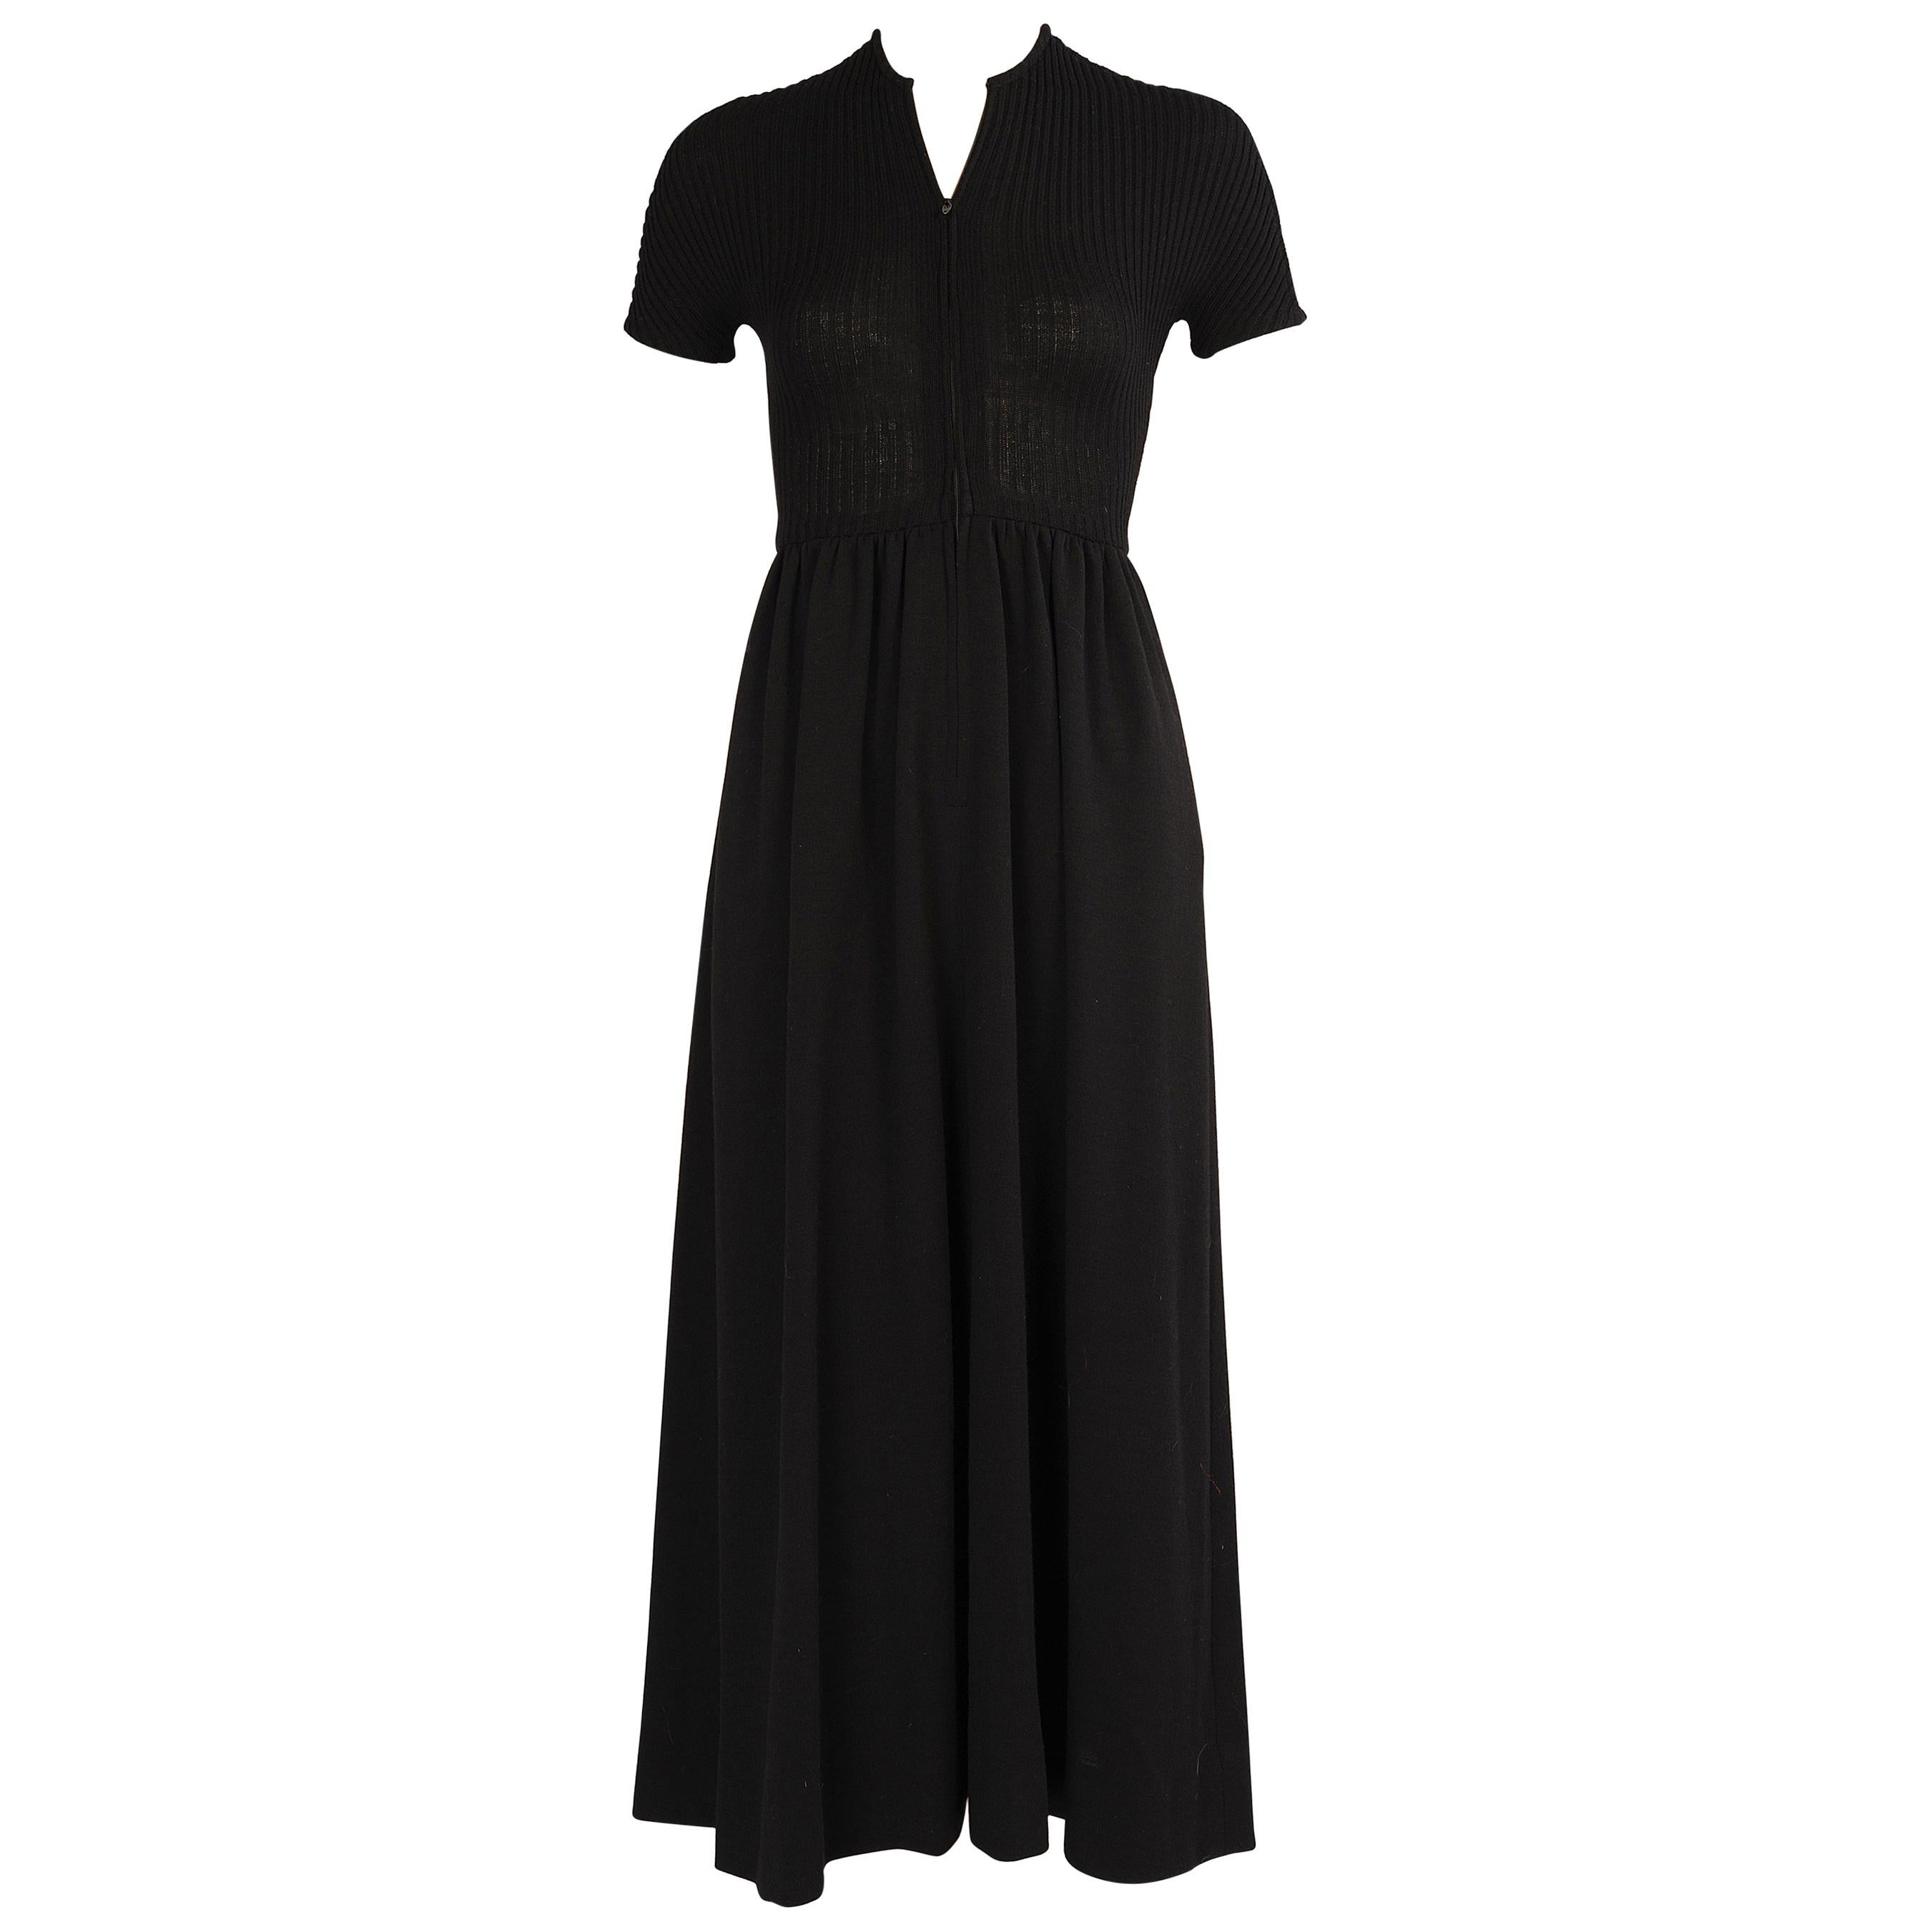 Rudi Gernreich is famous for designing the Topless Bathing Suit in the 1960's.  This dress looks so demure from the front with a wool knit with center zipper, short sleeves and a gathered skirt, but it is all about the back. The dress has a single